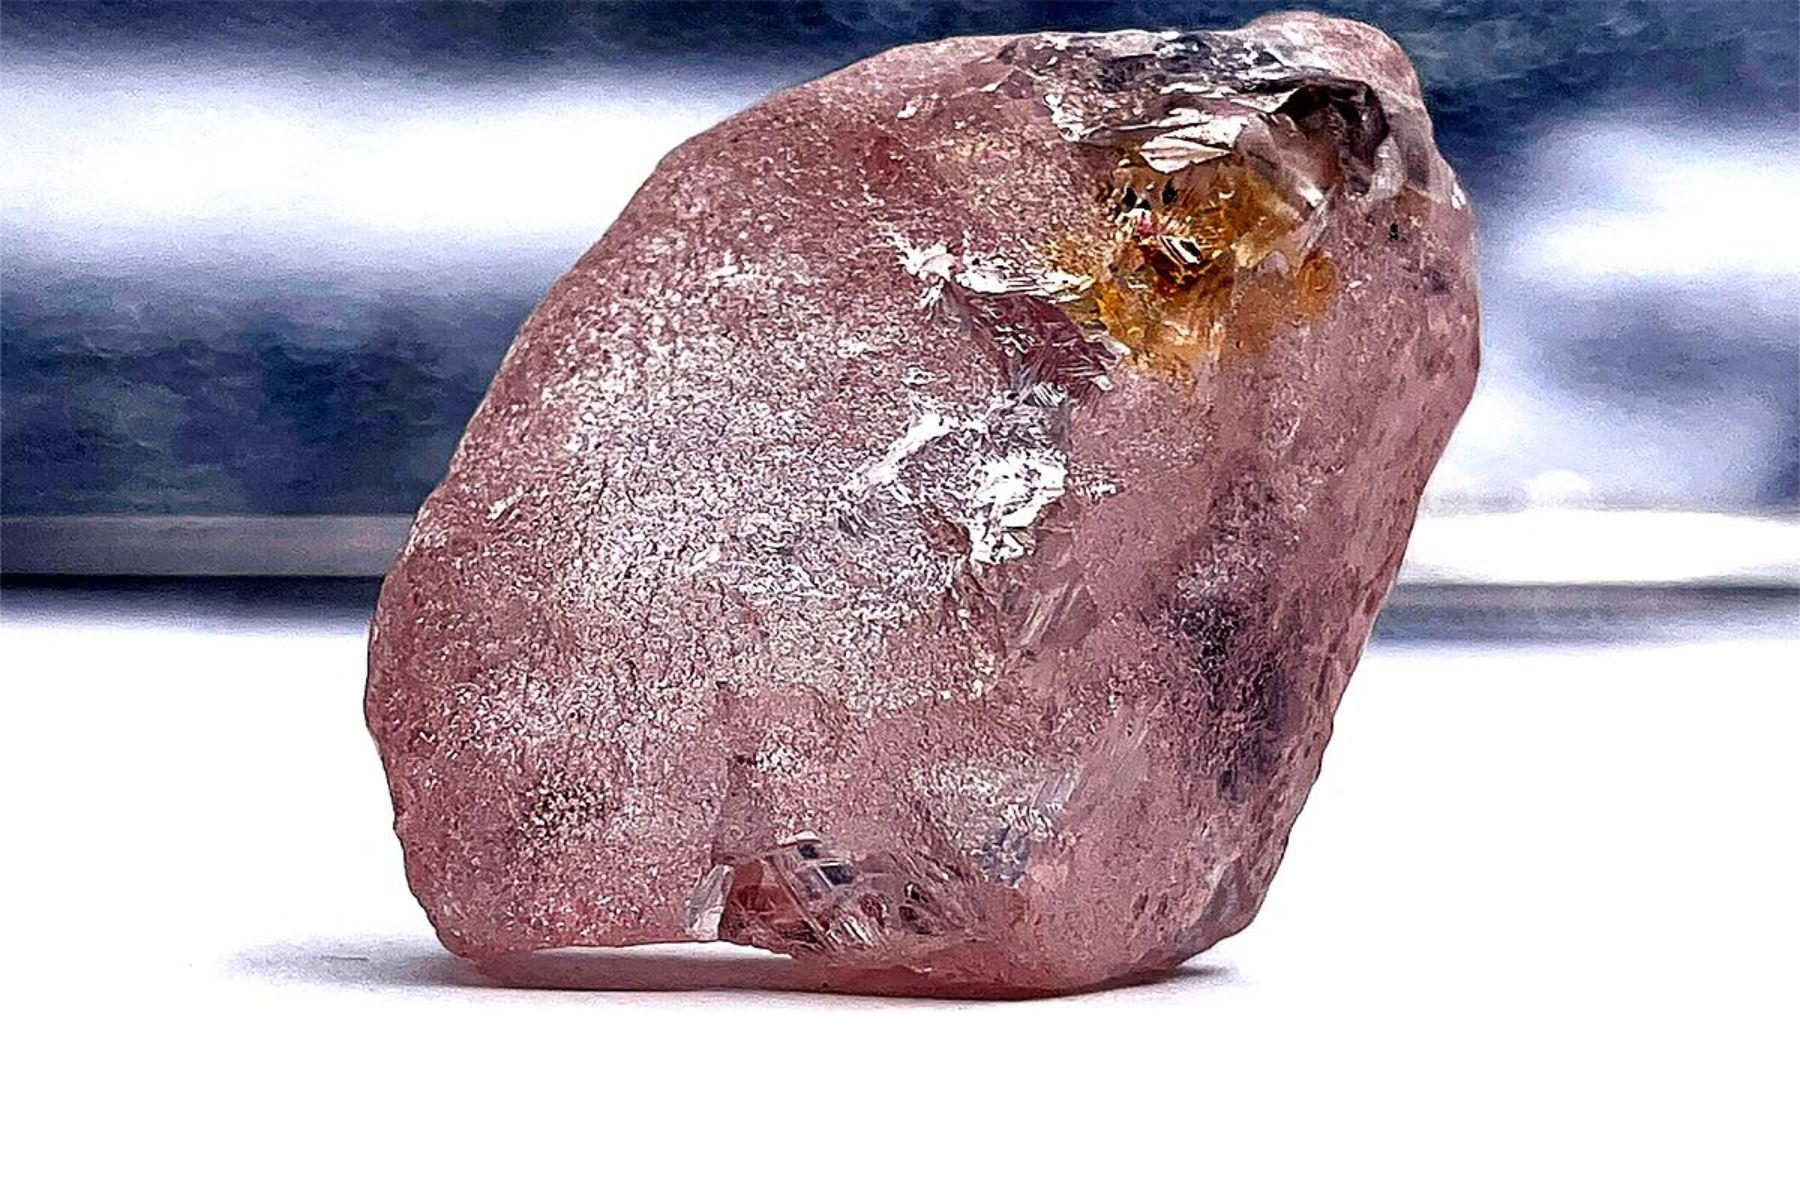 Lucapa Claims That This 170-carat Pink Diamond Is The Largest Discovered In 300 Years